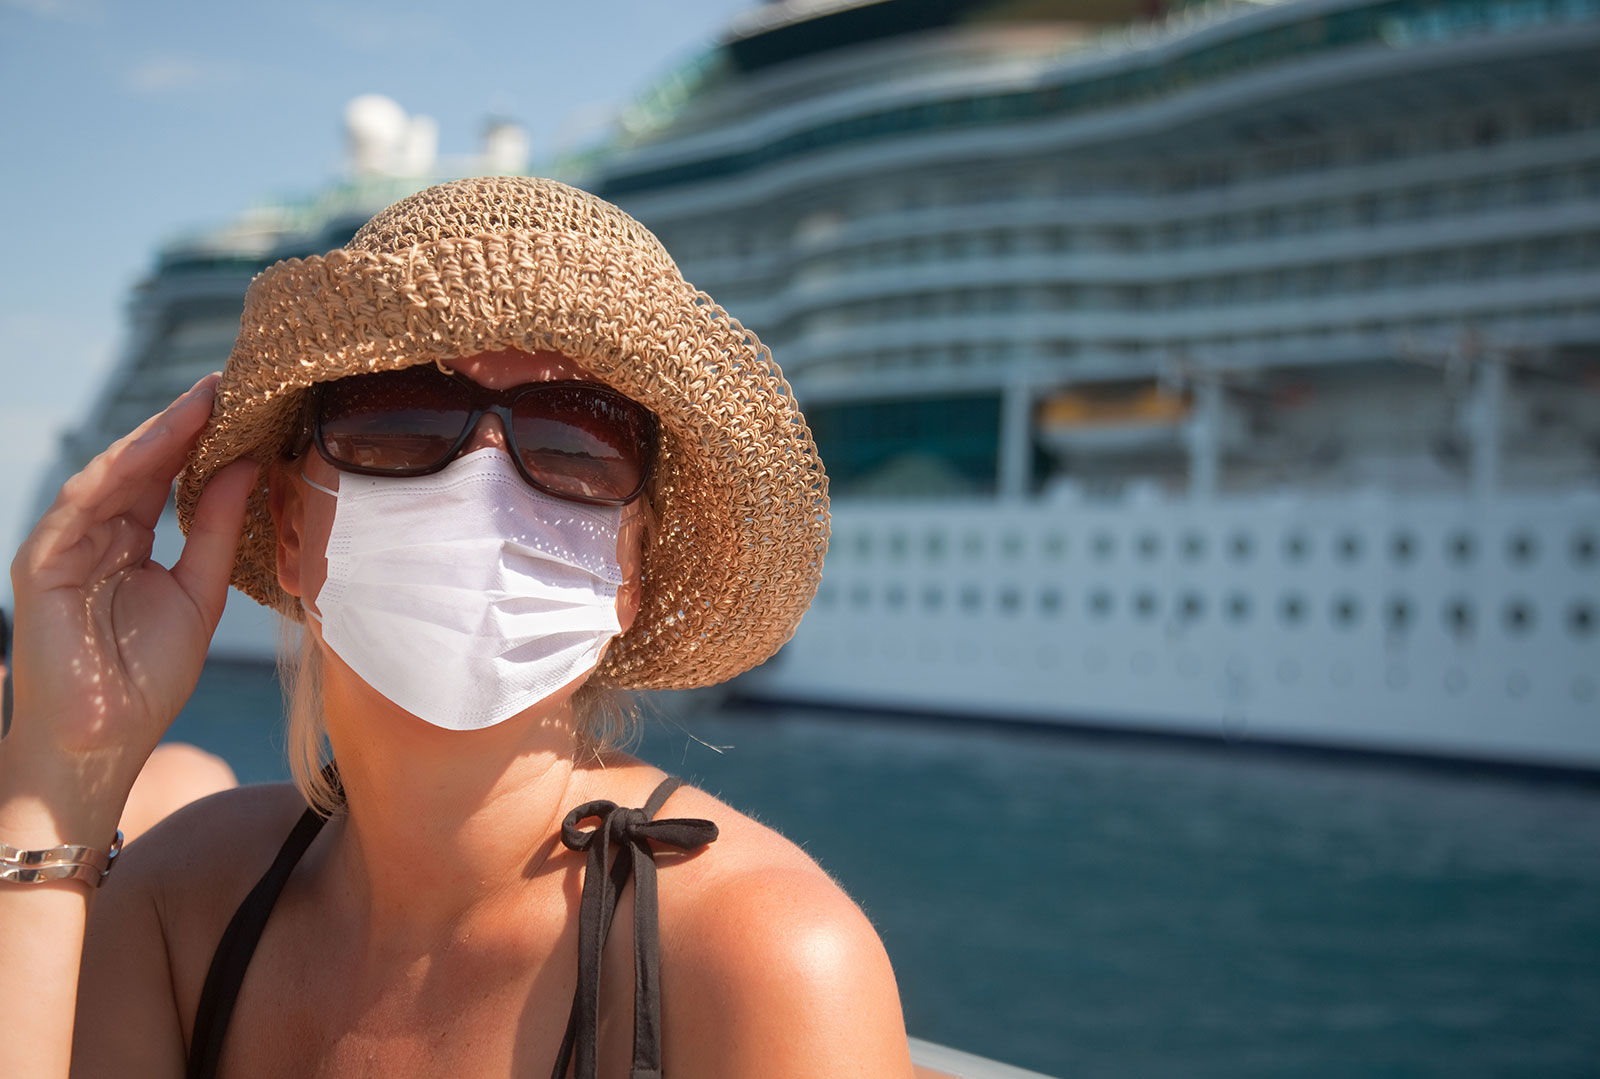 COVID-19 travel guide: Cruise ship safety